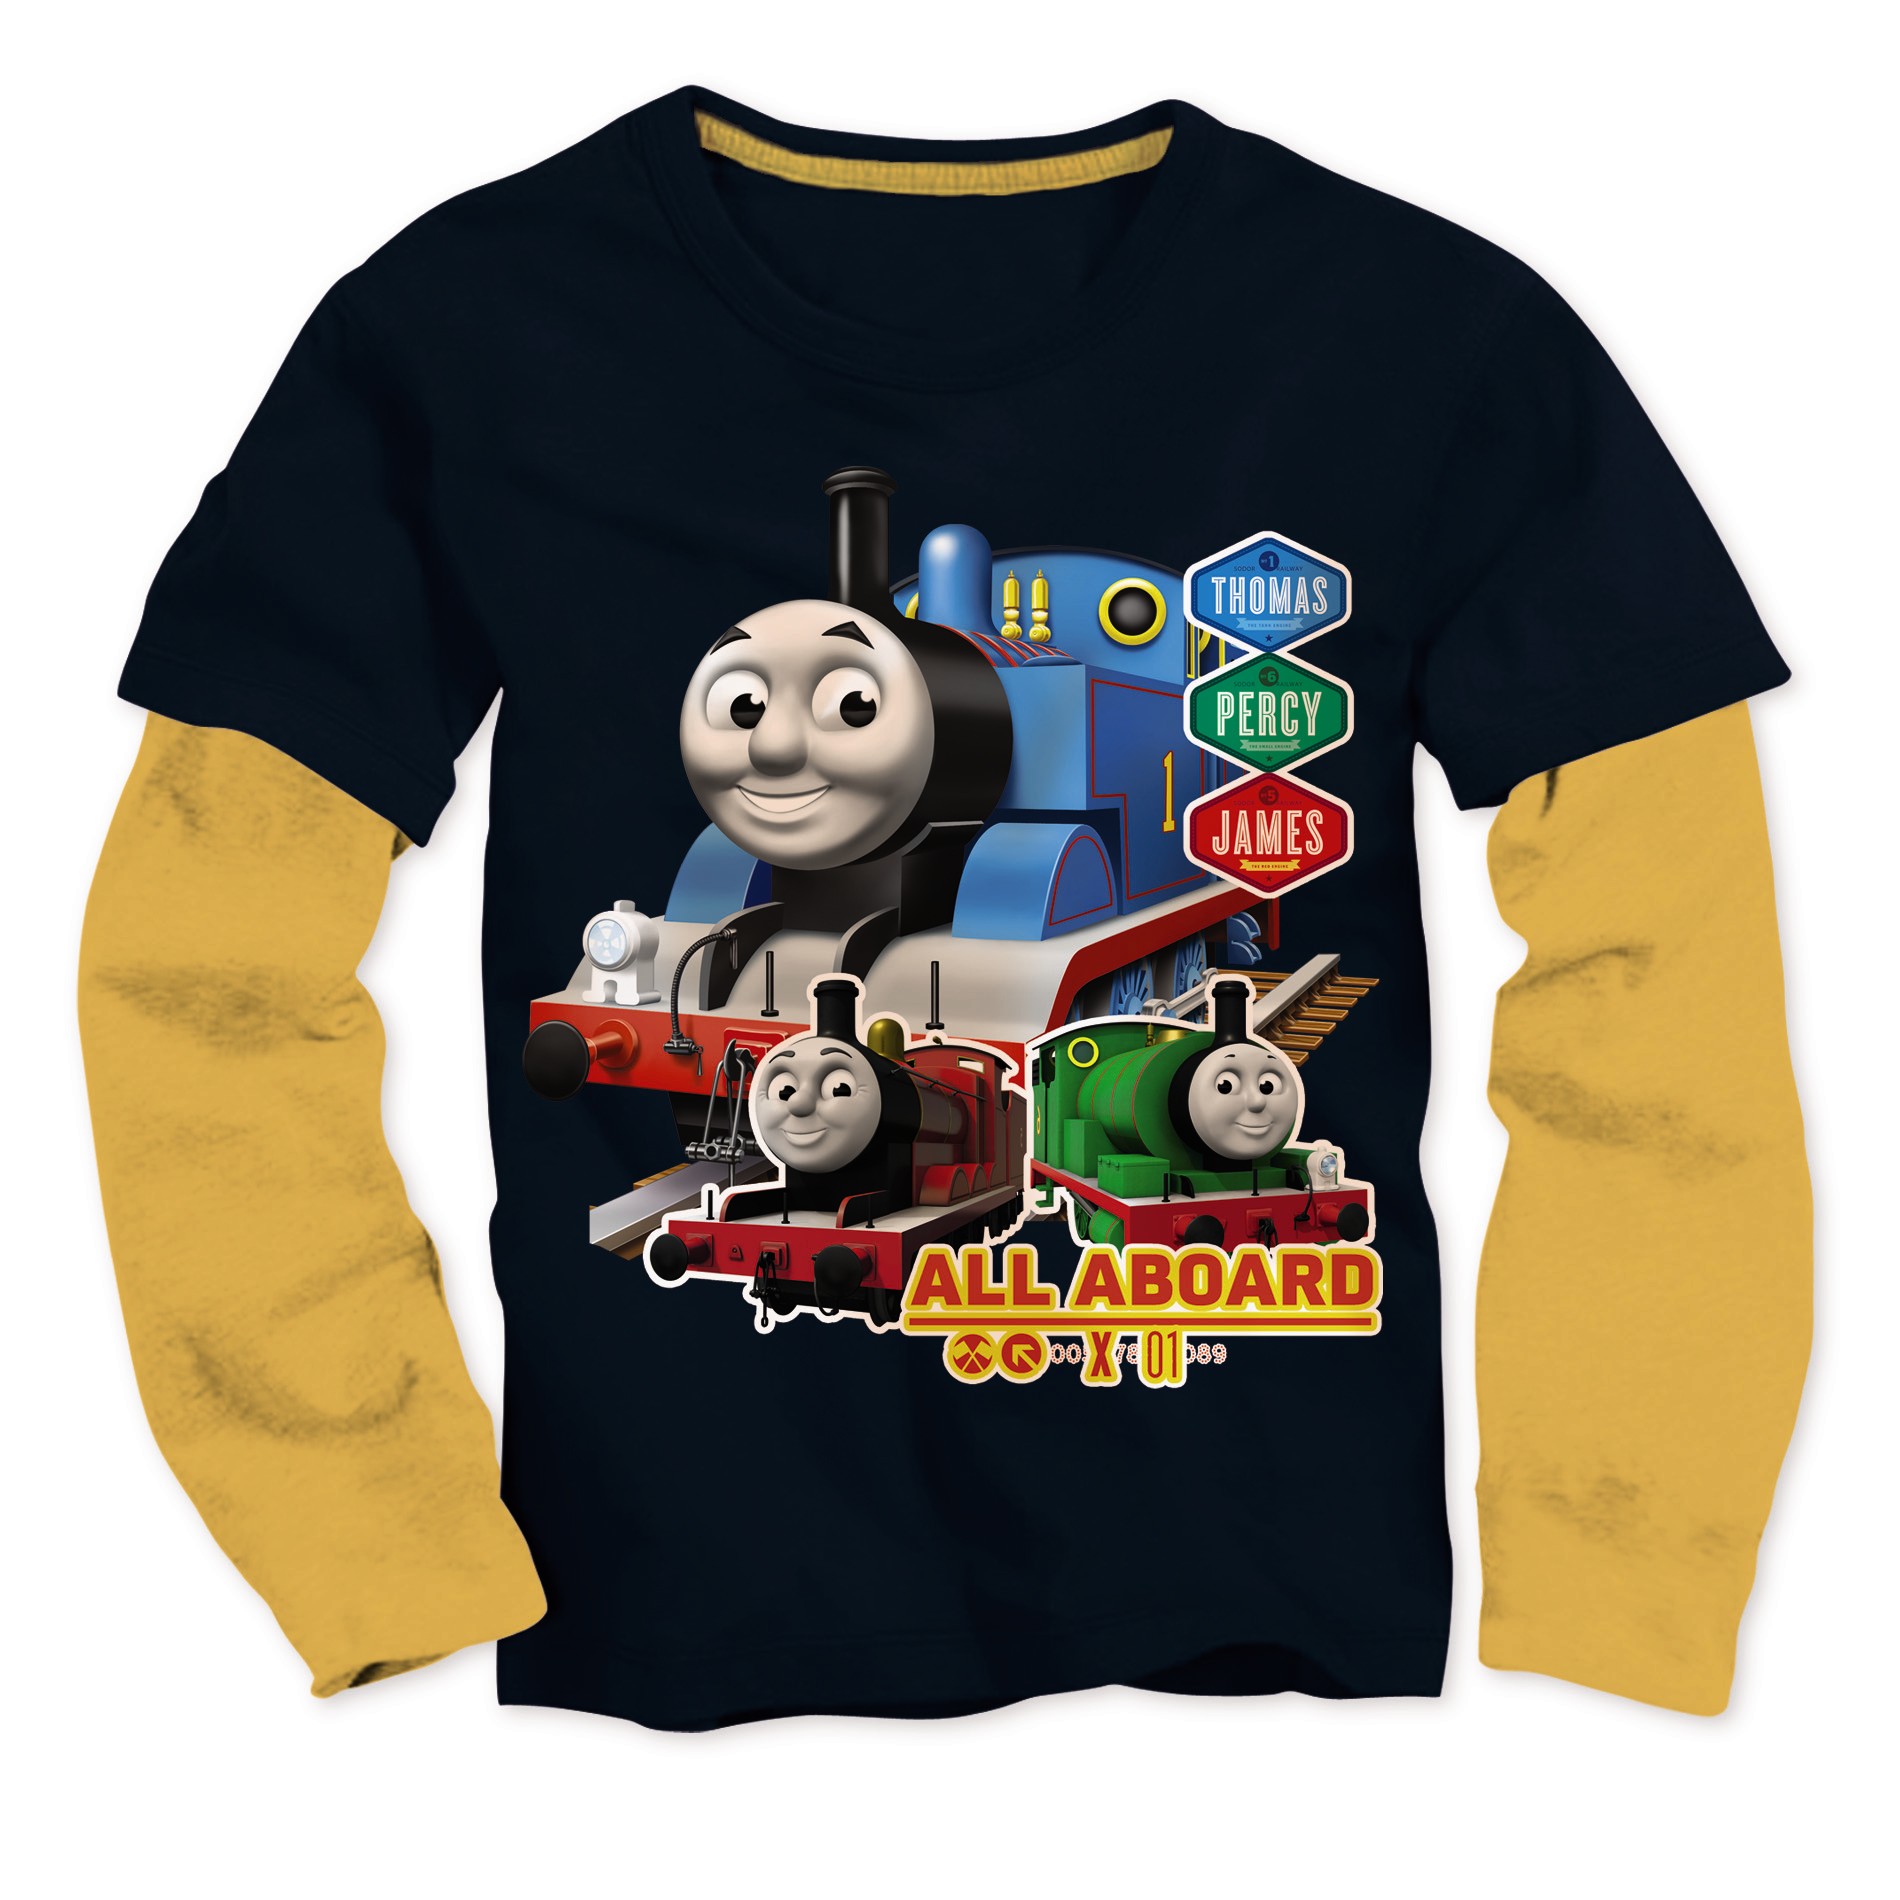 Thomas & Friends Toddler Boy's Long-Sleeve Graphic T-Shirt